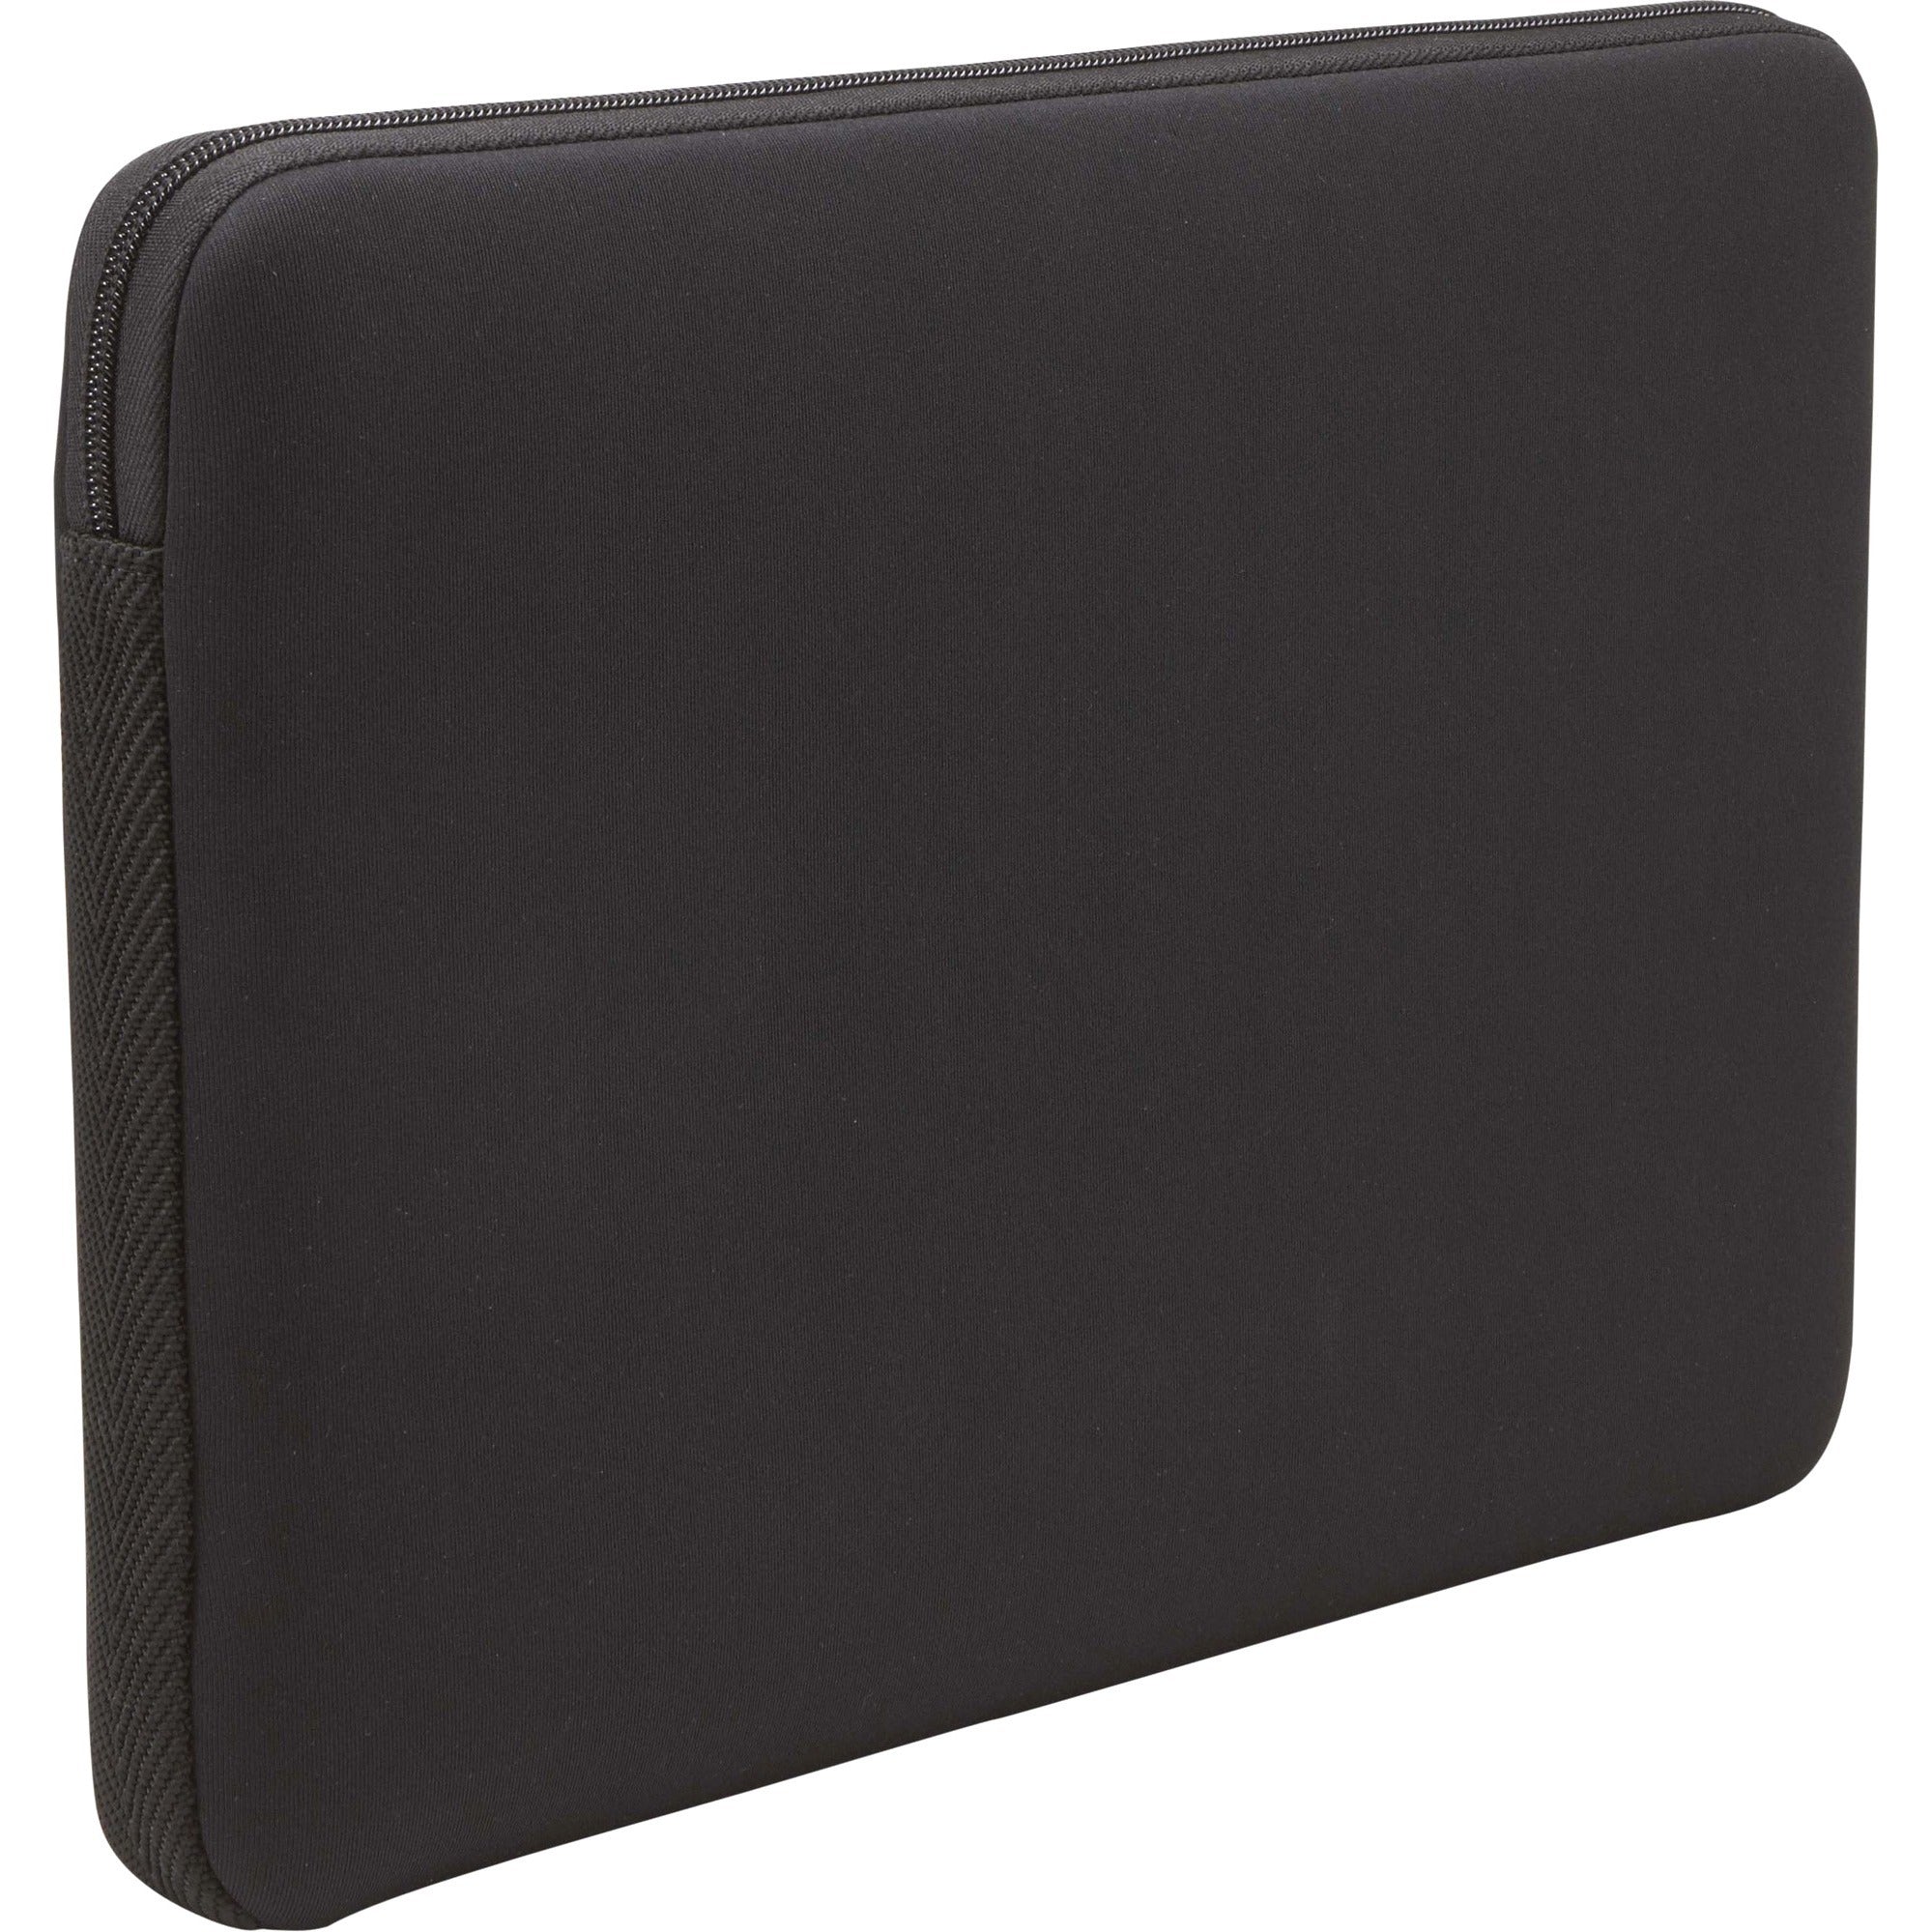 Case Logic Carrying Case (Sleeve) for 14" Notebook - Black